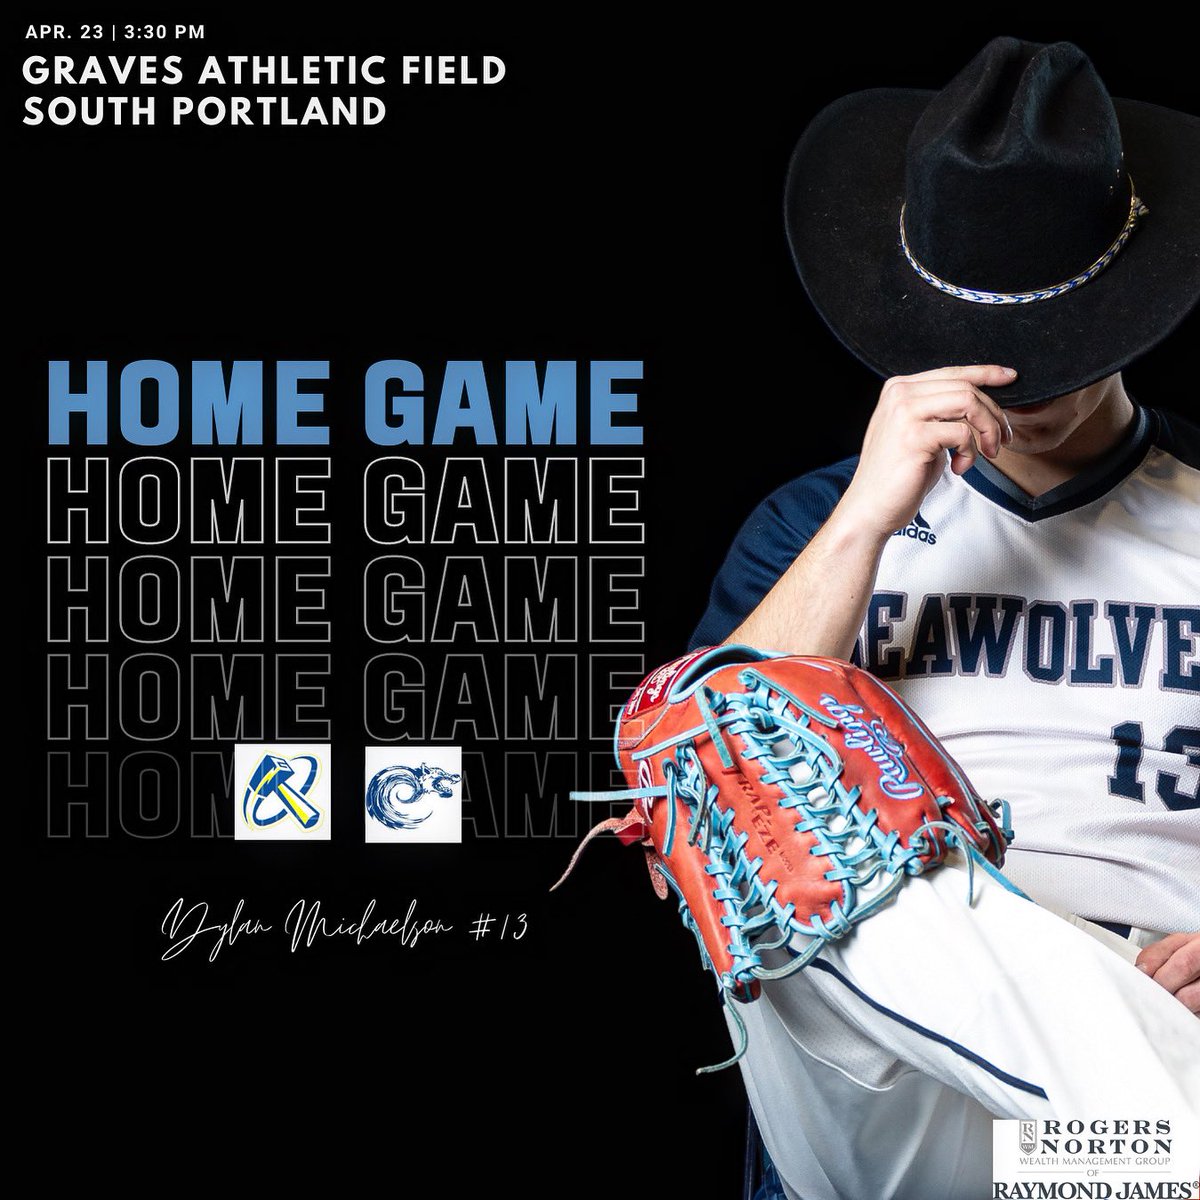 ⚾️ HOME GAME
➡️ @seawolvesbase 
.
🆚 Quincy College 
✅ @YSCC8 
📍 South Portland
⏰ 3:30 pm
📊 web.gc.com/teams/RM3uHr0a…
📺 ysccsportsnetwork.com/southernmainec…

#WeAreSMCC #GoSeawolves @USCAA @smccmaine @MaineSportsComm @MCCSme